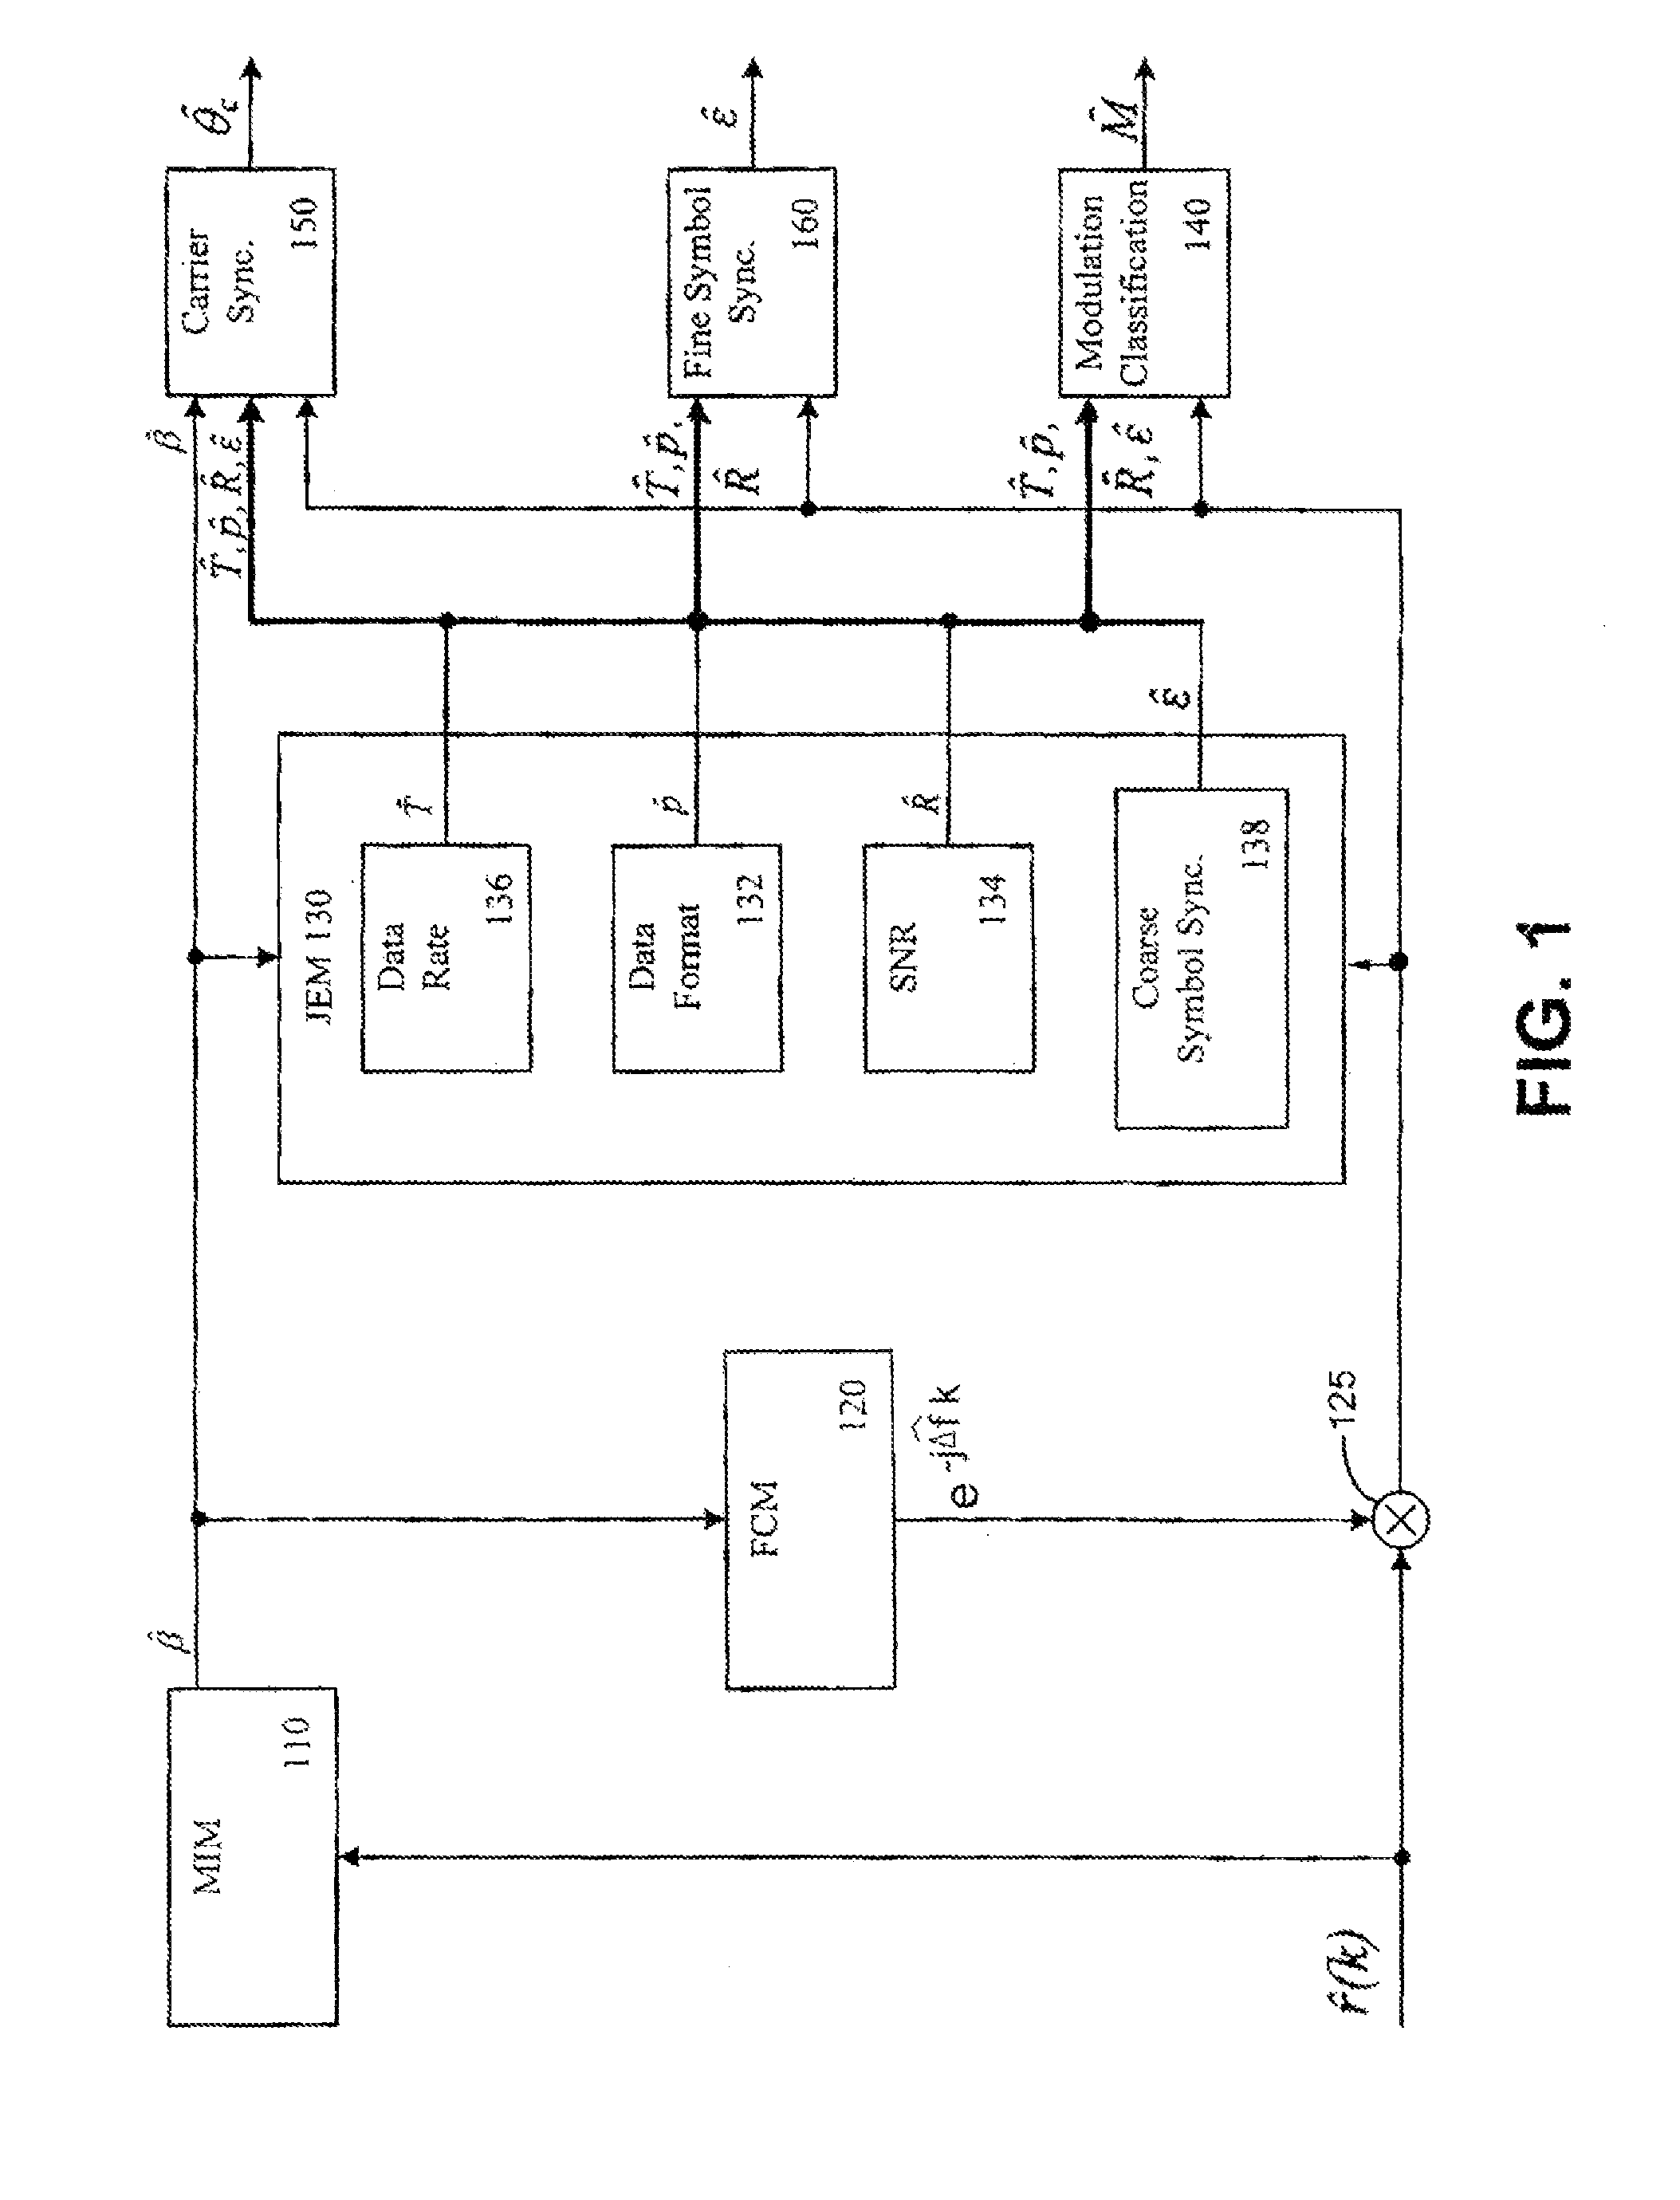 Self-configurable radio receiver system and method for use with signals without prior knowledge of signal defining characteristics